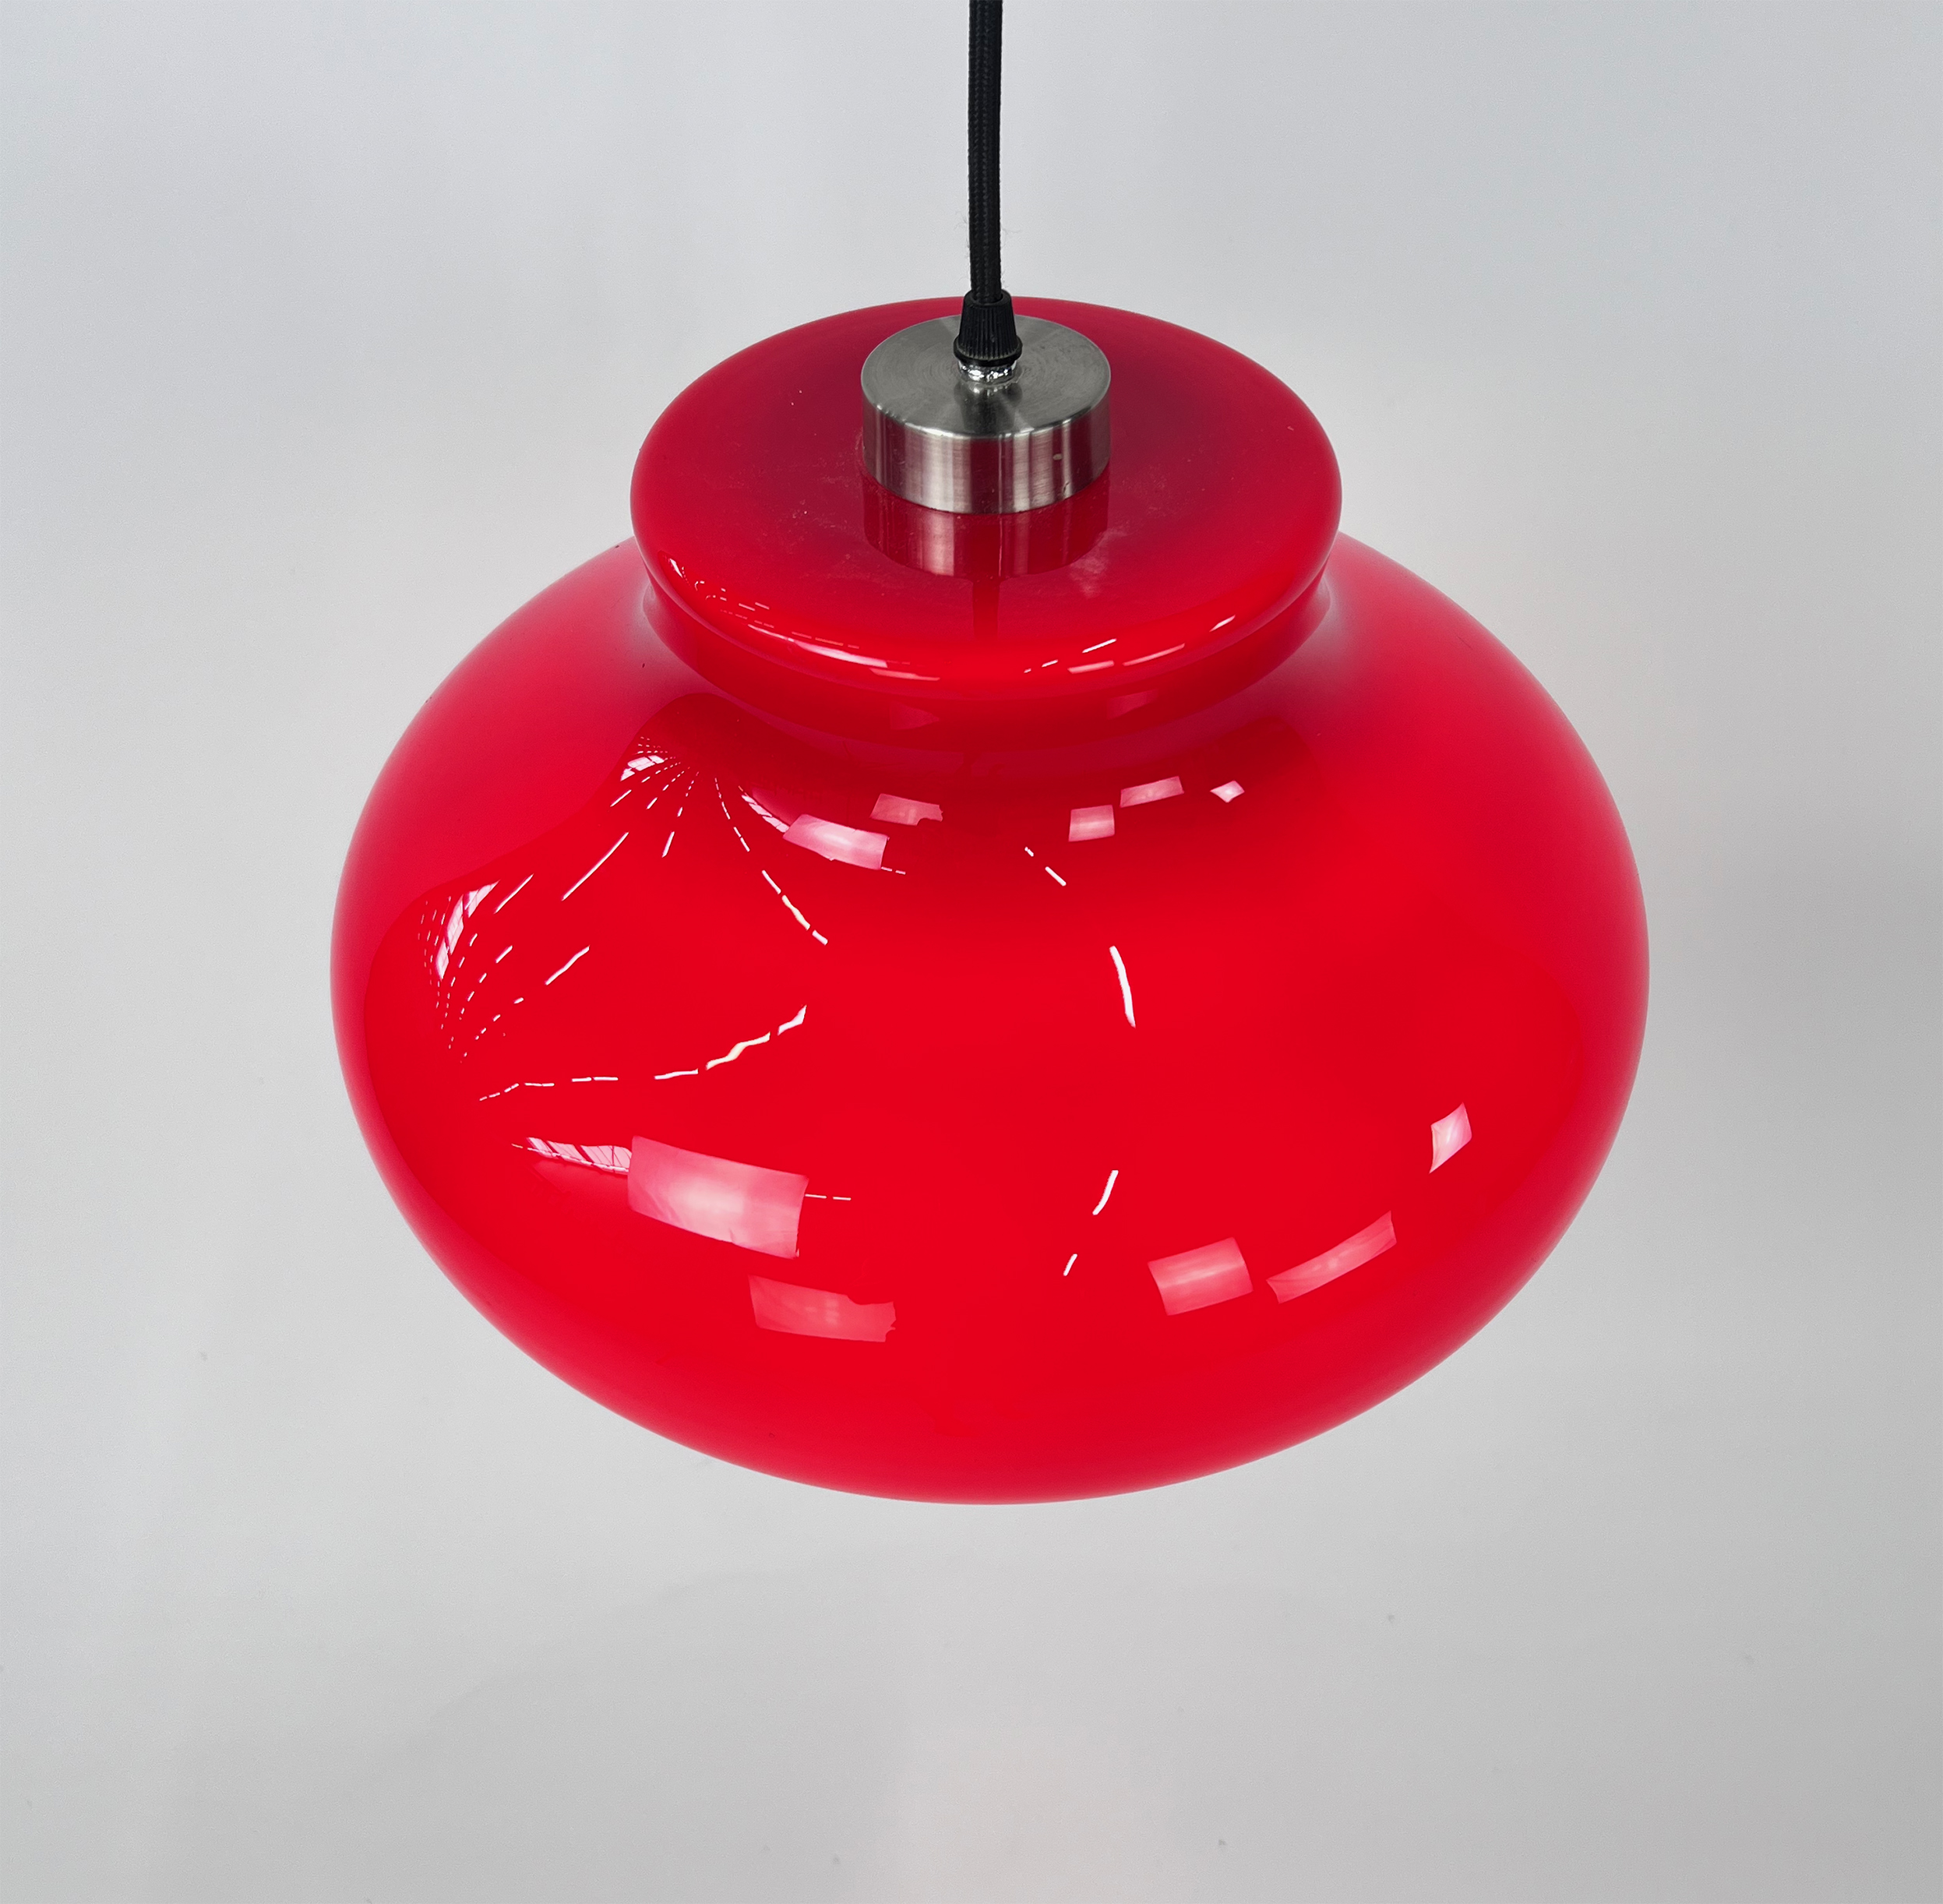 Vintage Red Glass Pendant Lamp, 1960s